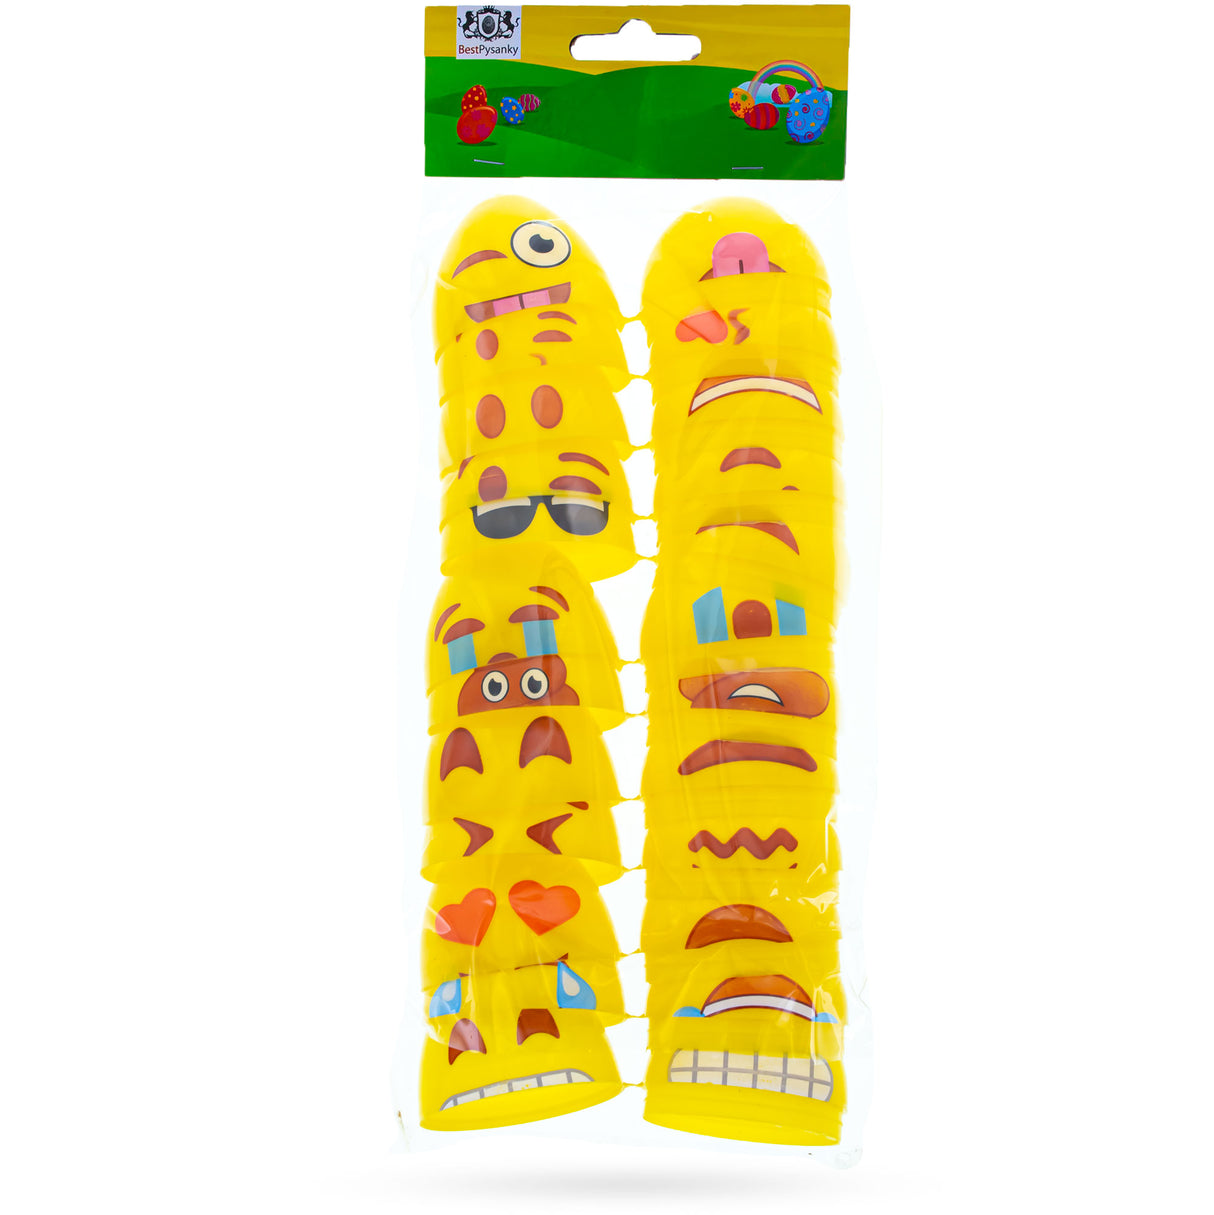 Shop Set of 12 Facial Expressions Plastic Easter Eggs 2.25 Inches. Buy Easter Eggs Plastic Solid Color Yellow Oval Plastic for Sale by Online Gift Shop BestPysanky fillable plastic eggs, plastic eggs,  plastic eggs fillable, easter eggs bulk, plastic eggs for toys, Easter decor, plastic eggs easter, egg hunt, Easter decorations, decorative